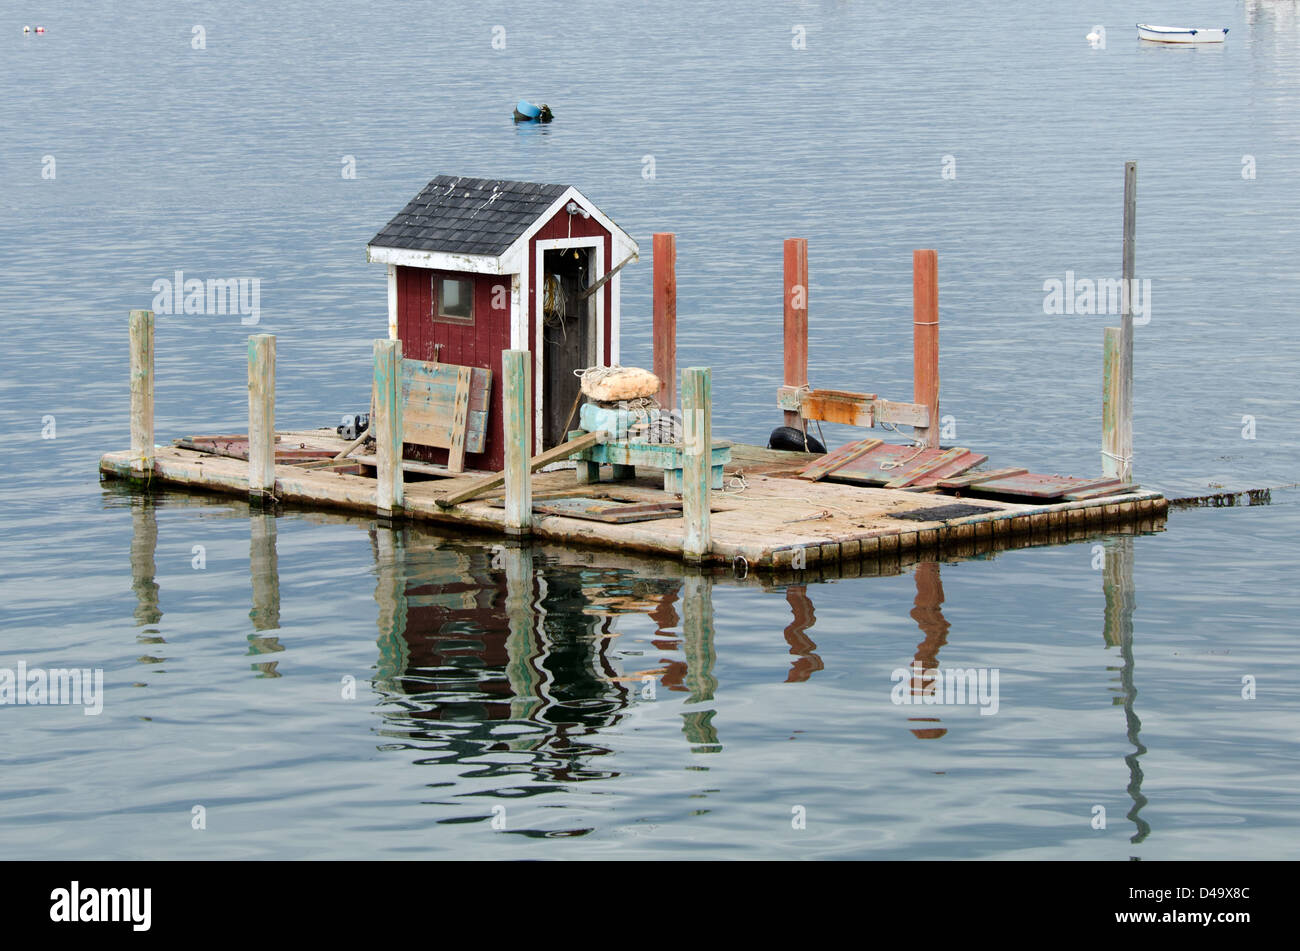 A clever fishing shack floats off Beals Island, Maine. Stock Photo